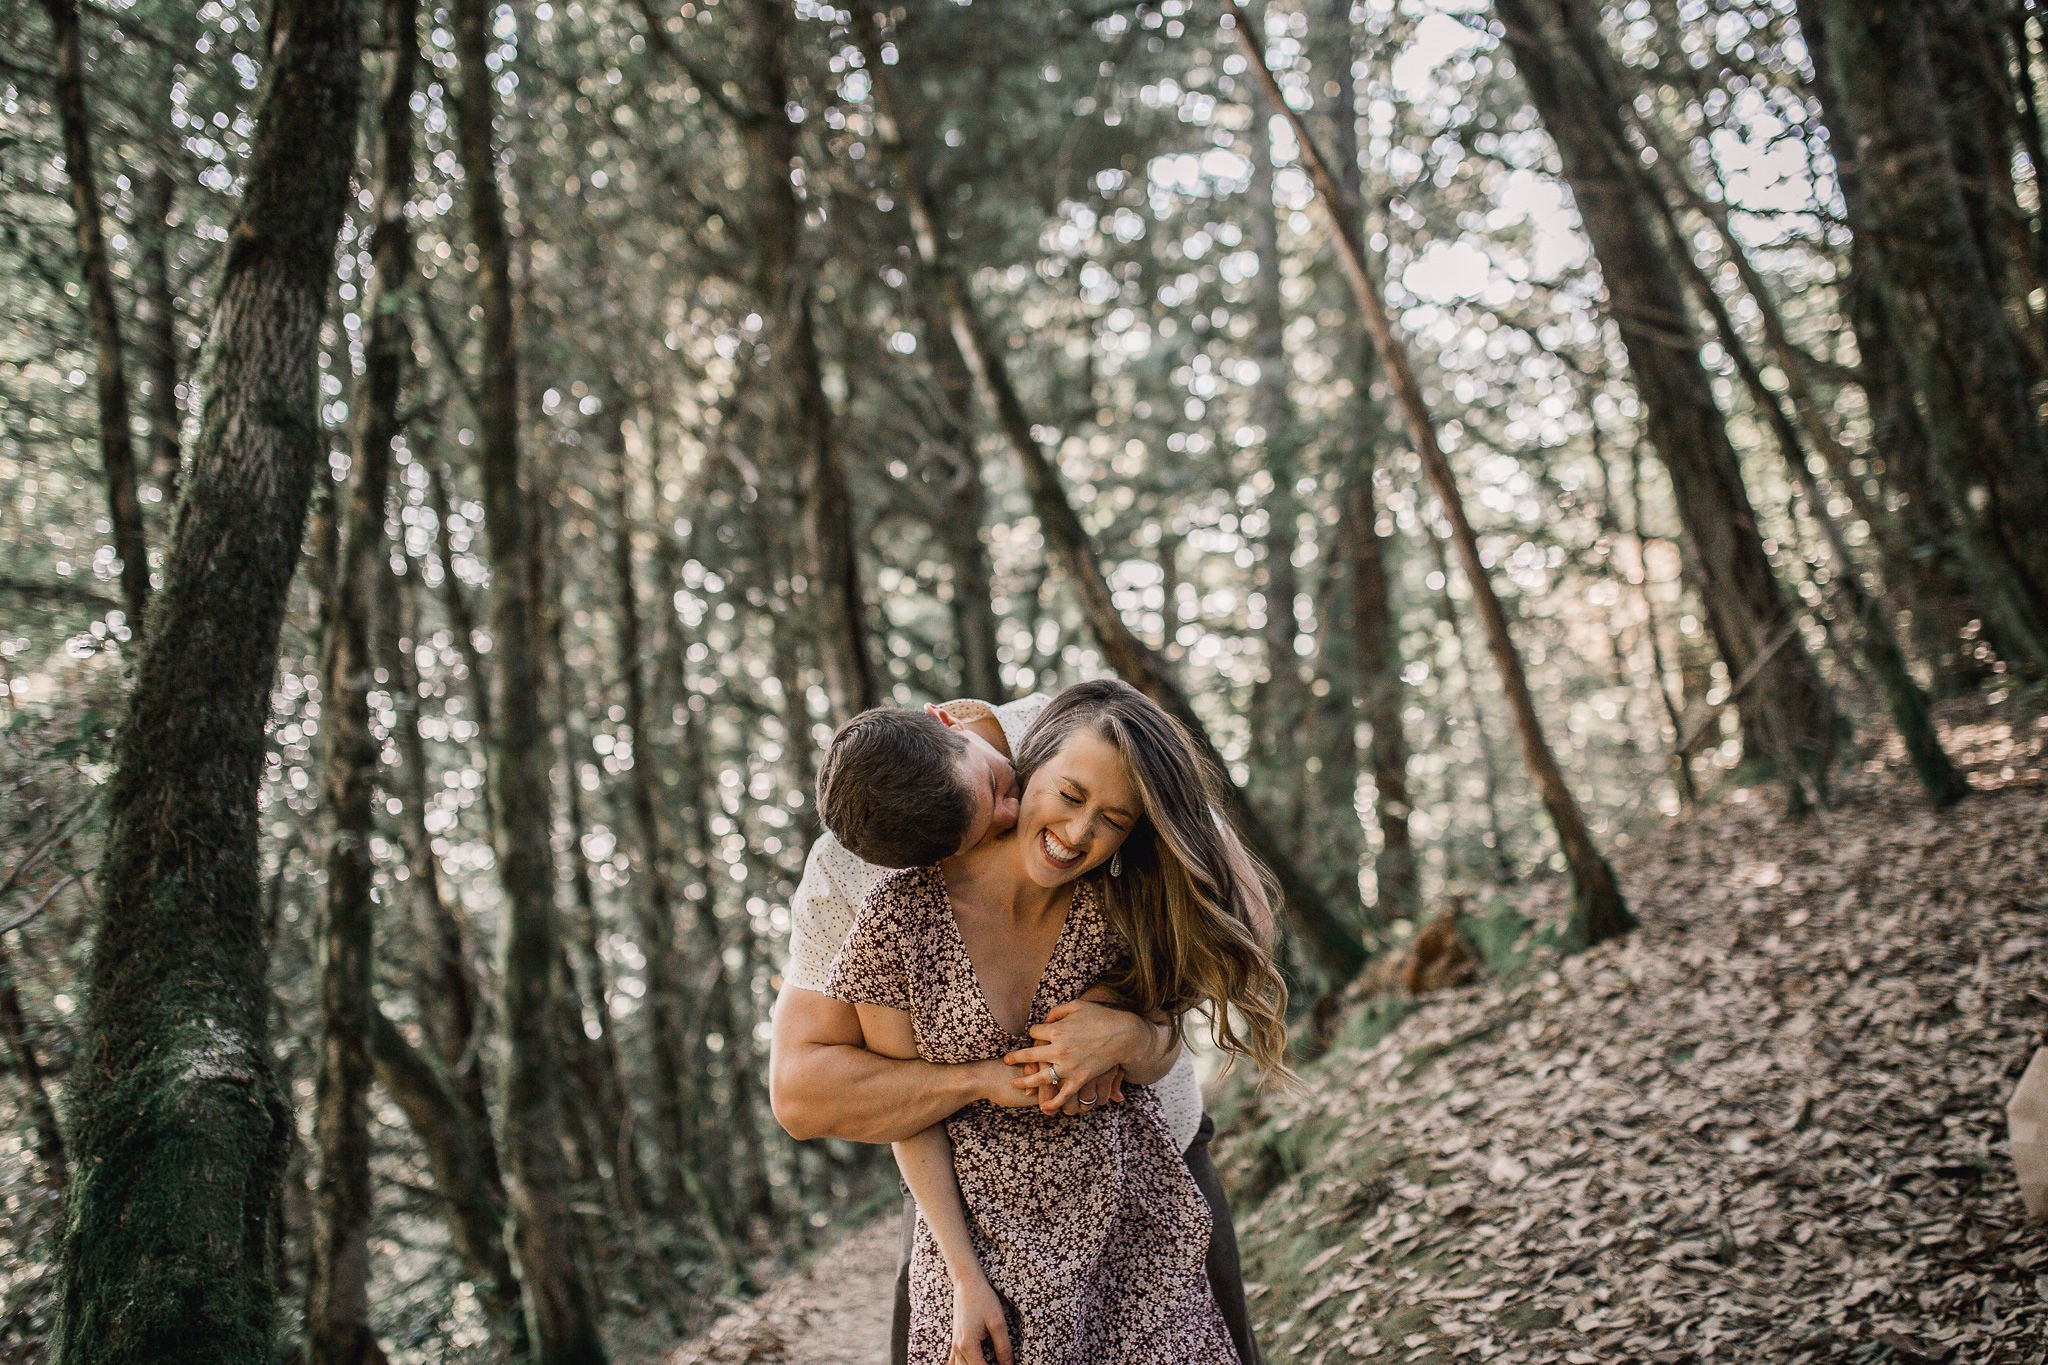 5 Engagement Session Tips by Ella Winston